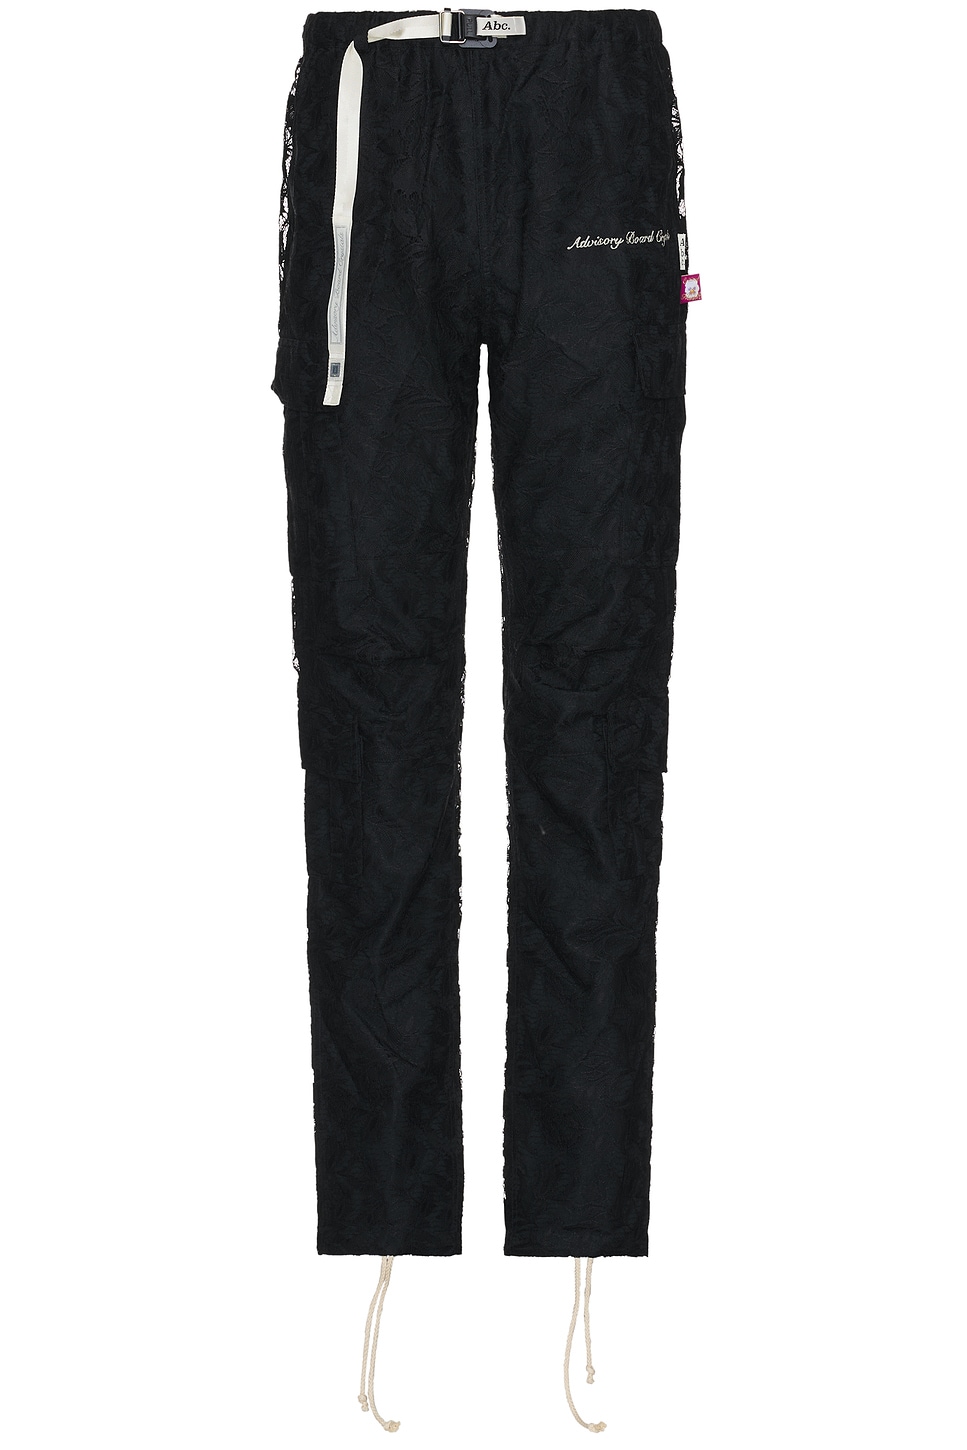 Image 1 of Advisory Board Crystals Pacifist Bdu Pant in Black